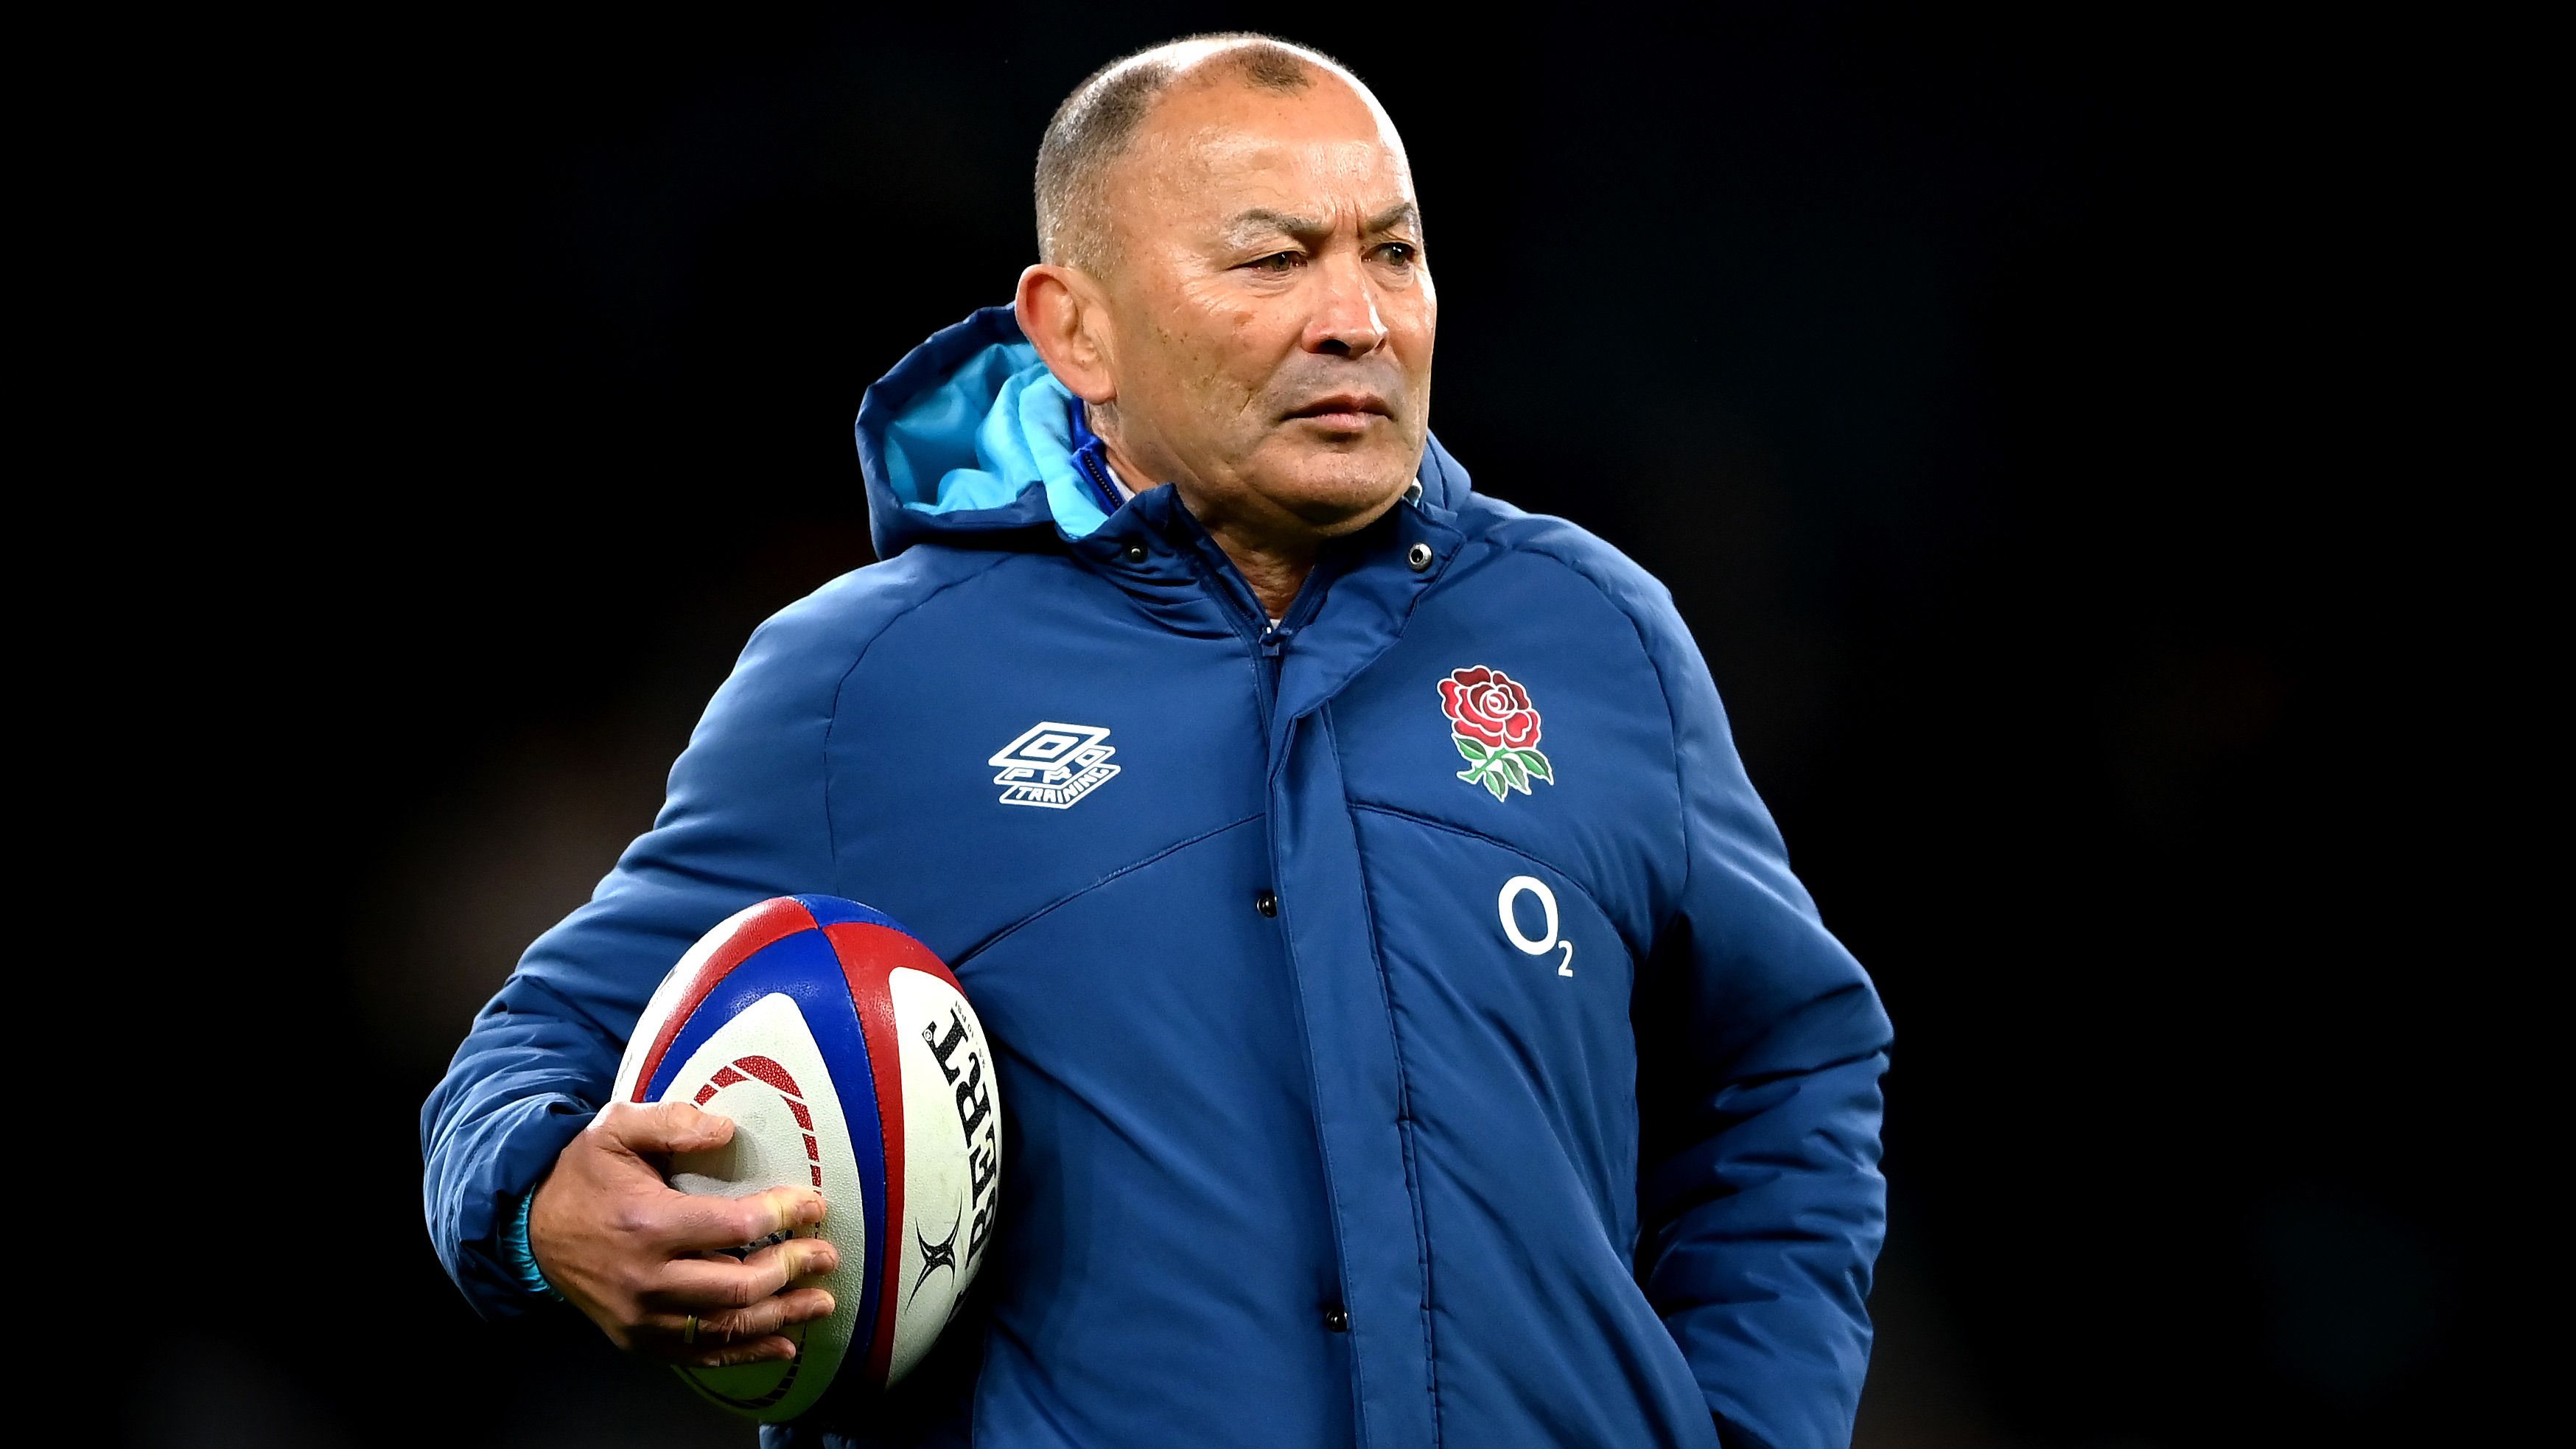 Eddie Jones was finally removed from his station as England coach on Tuesday.